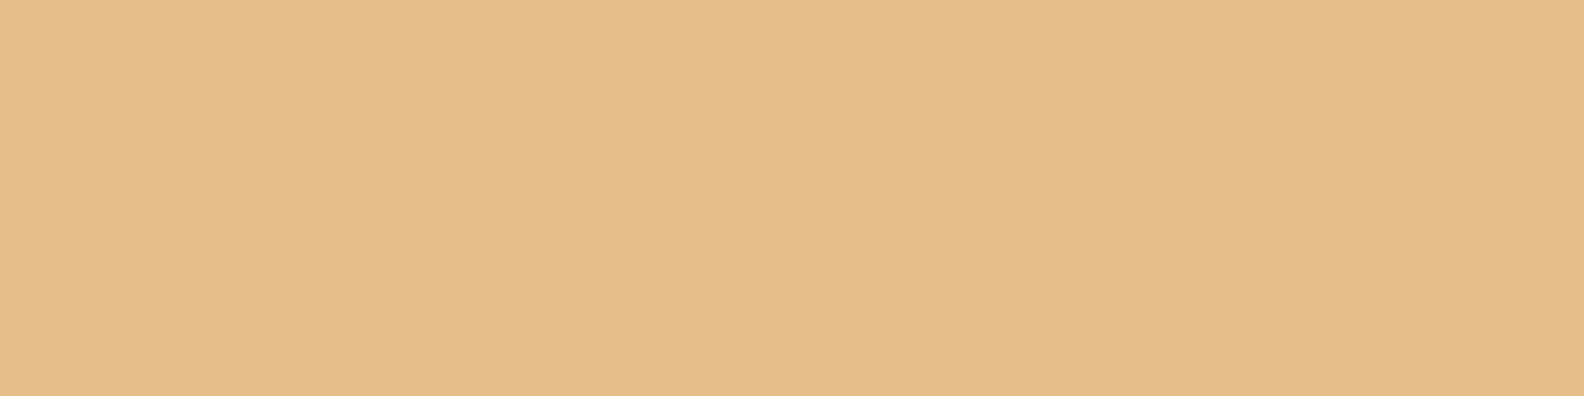 1584x396 Pale Gold Solid Color Background